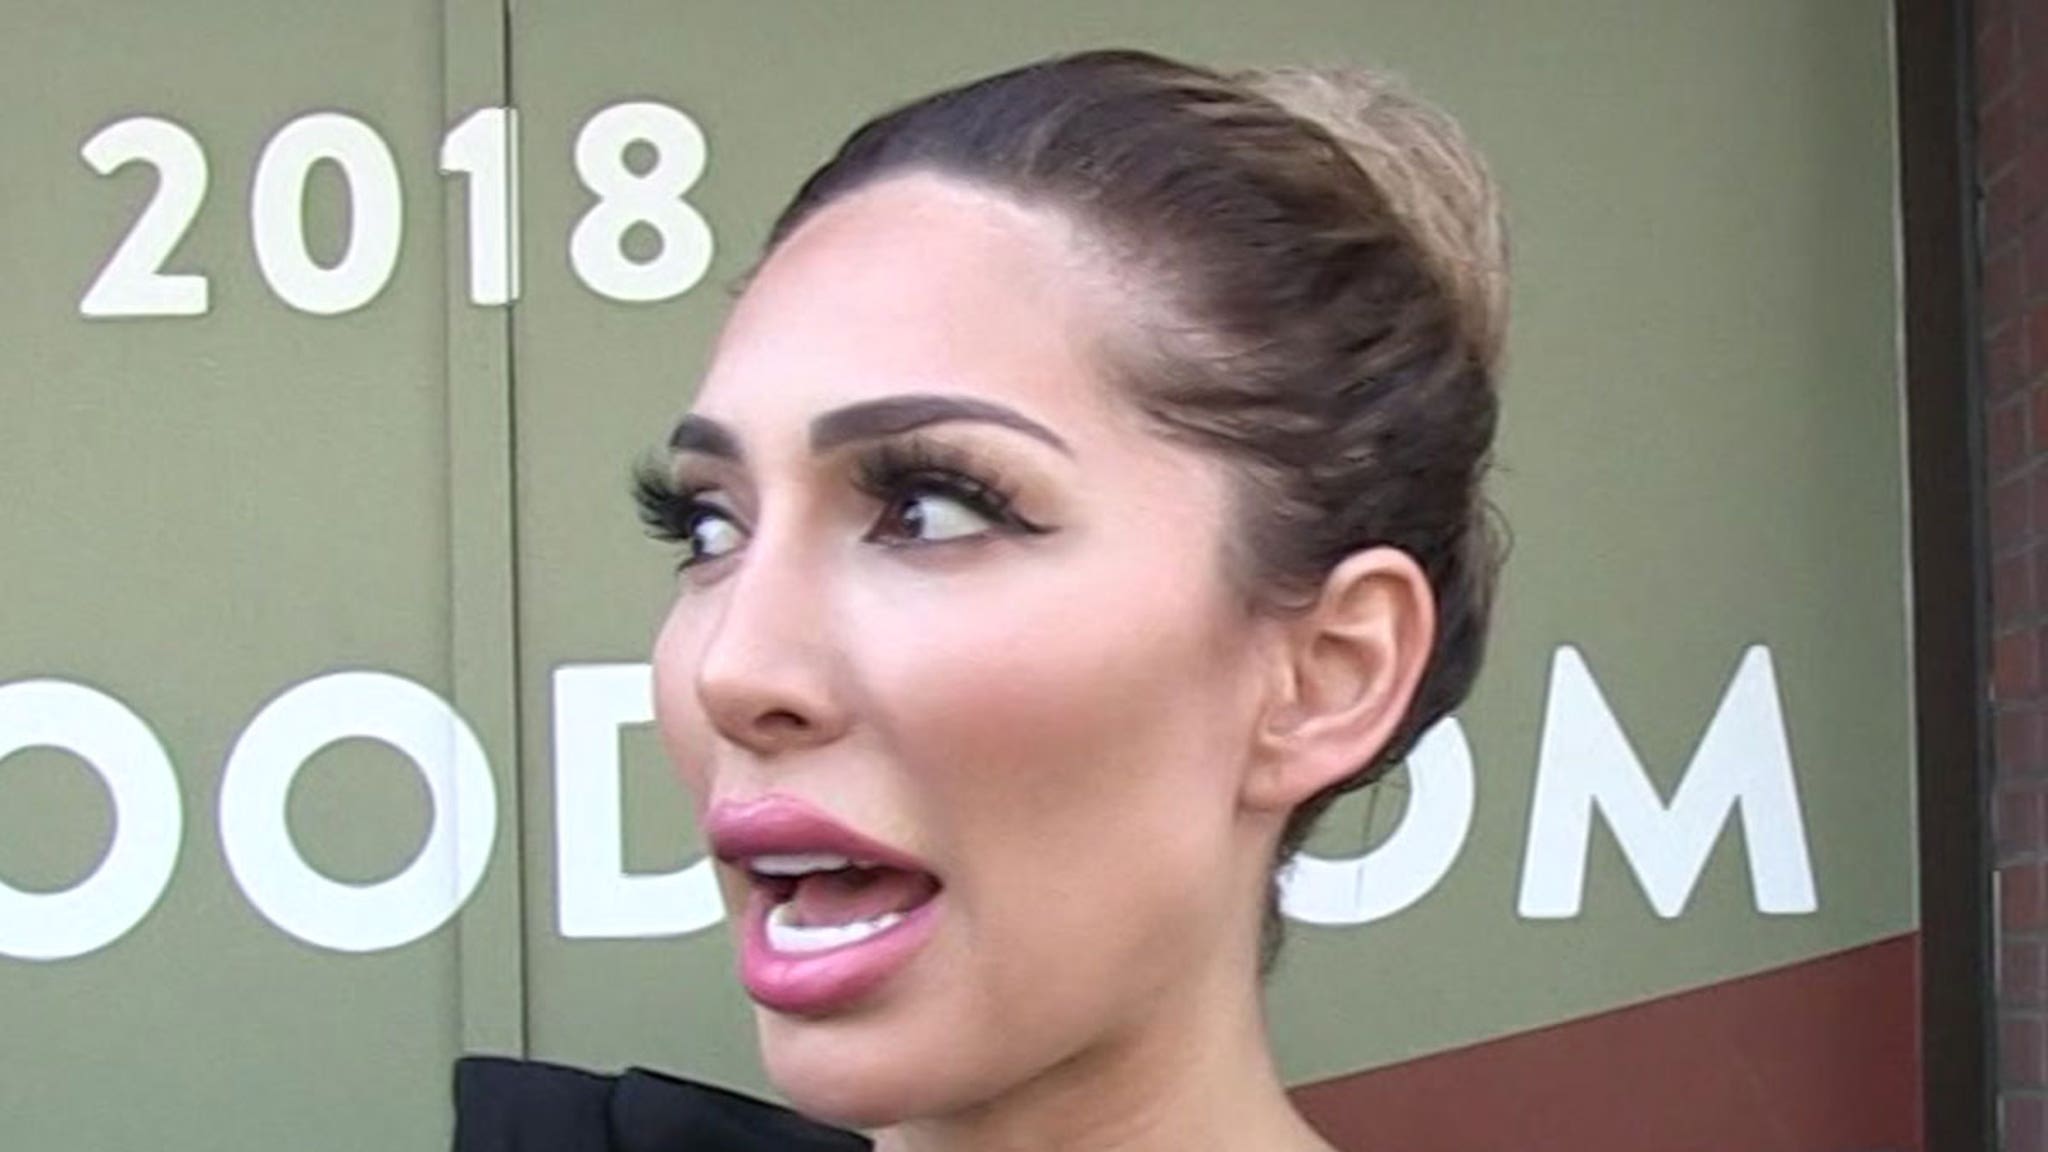 Farrah Abraham Likely to Sue Club Over Arrest, Alleged Victim Shares Injury Photo thumbnail